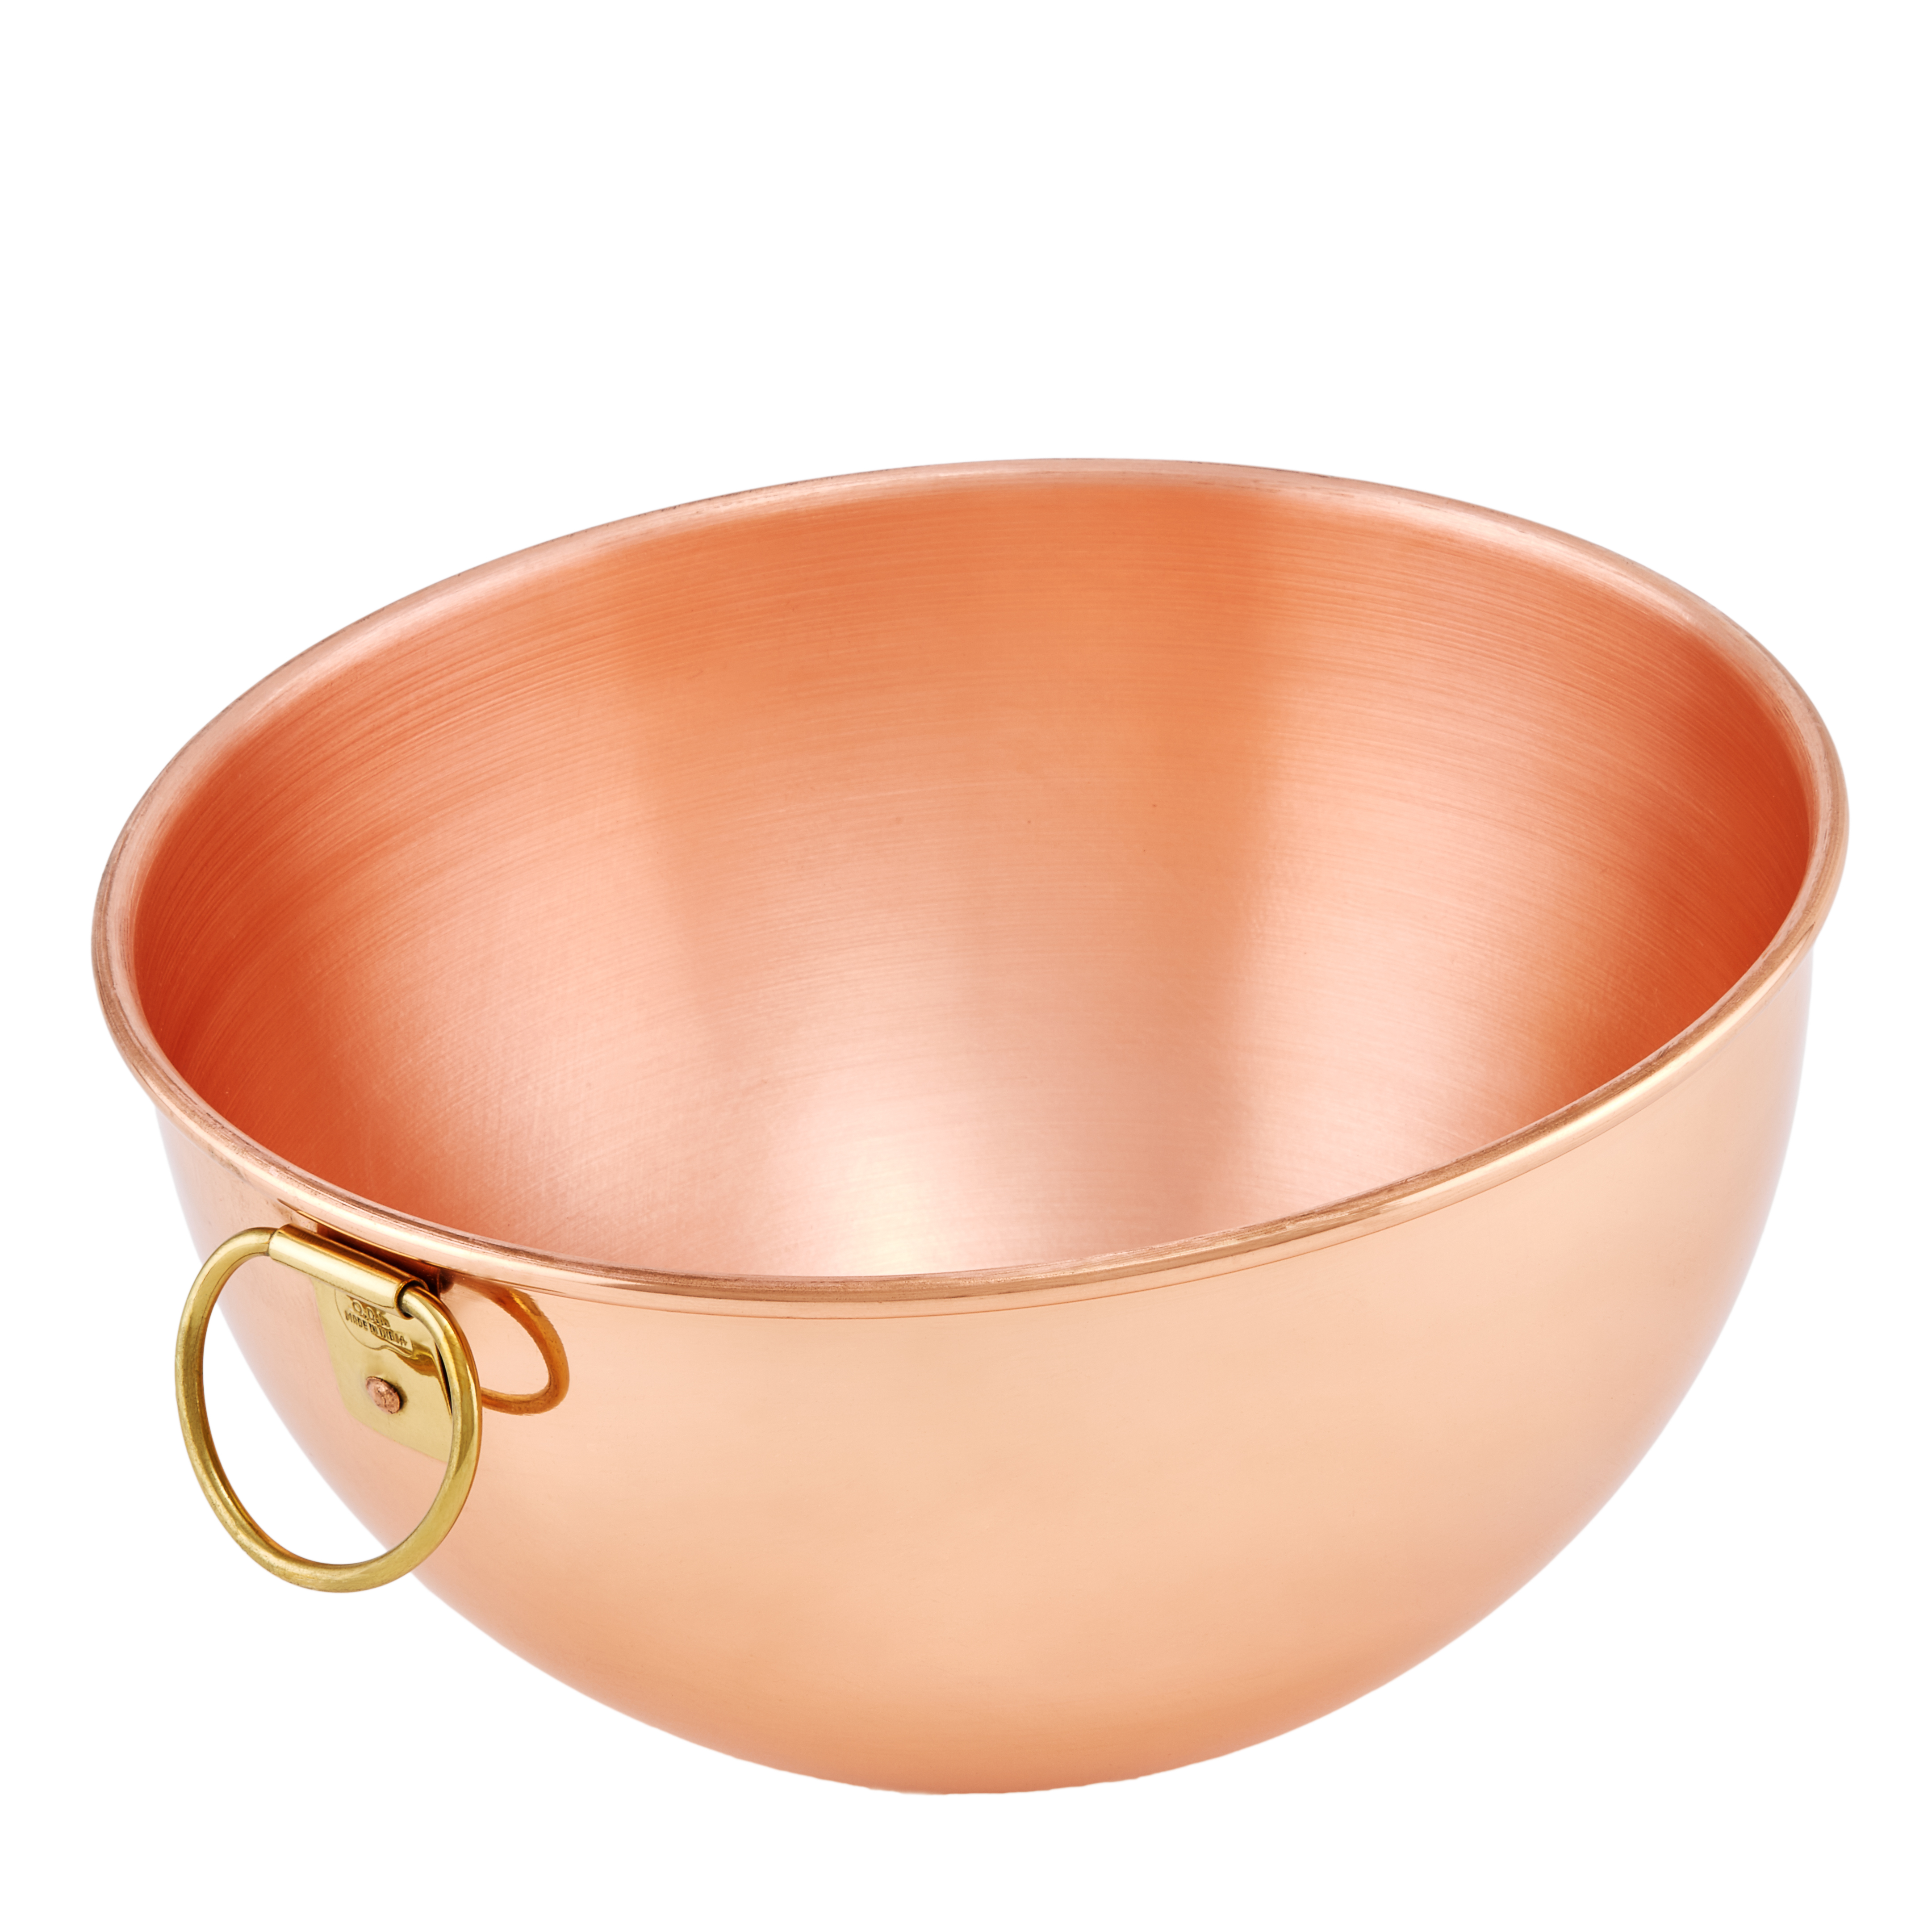 2 Qt. Solid Copper Beating Bowl - image 1 of 4